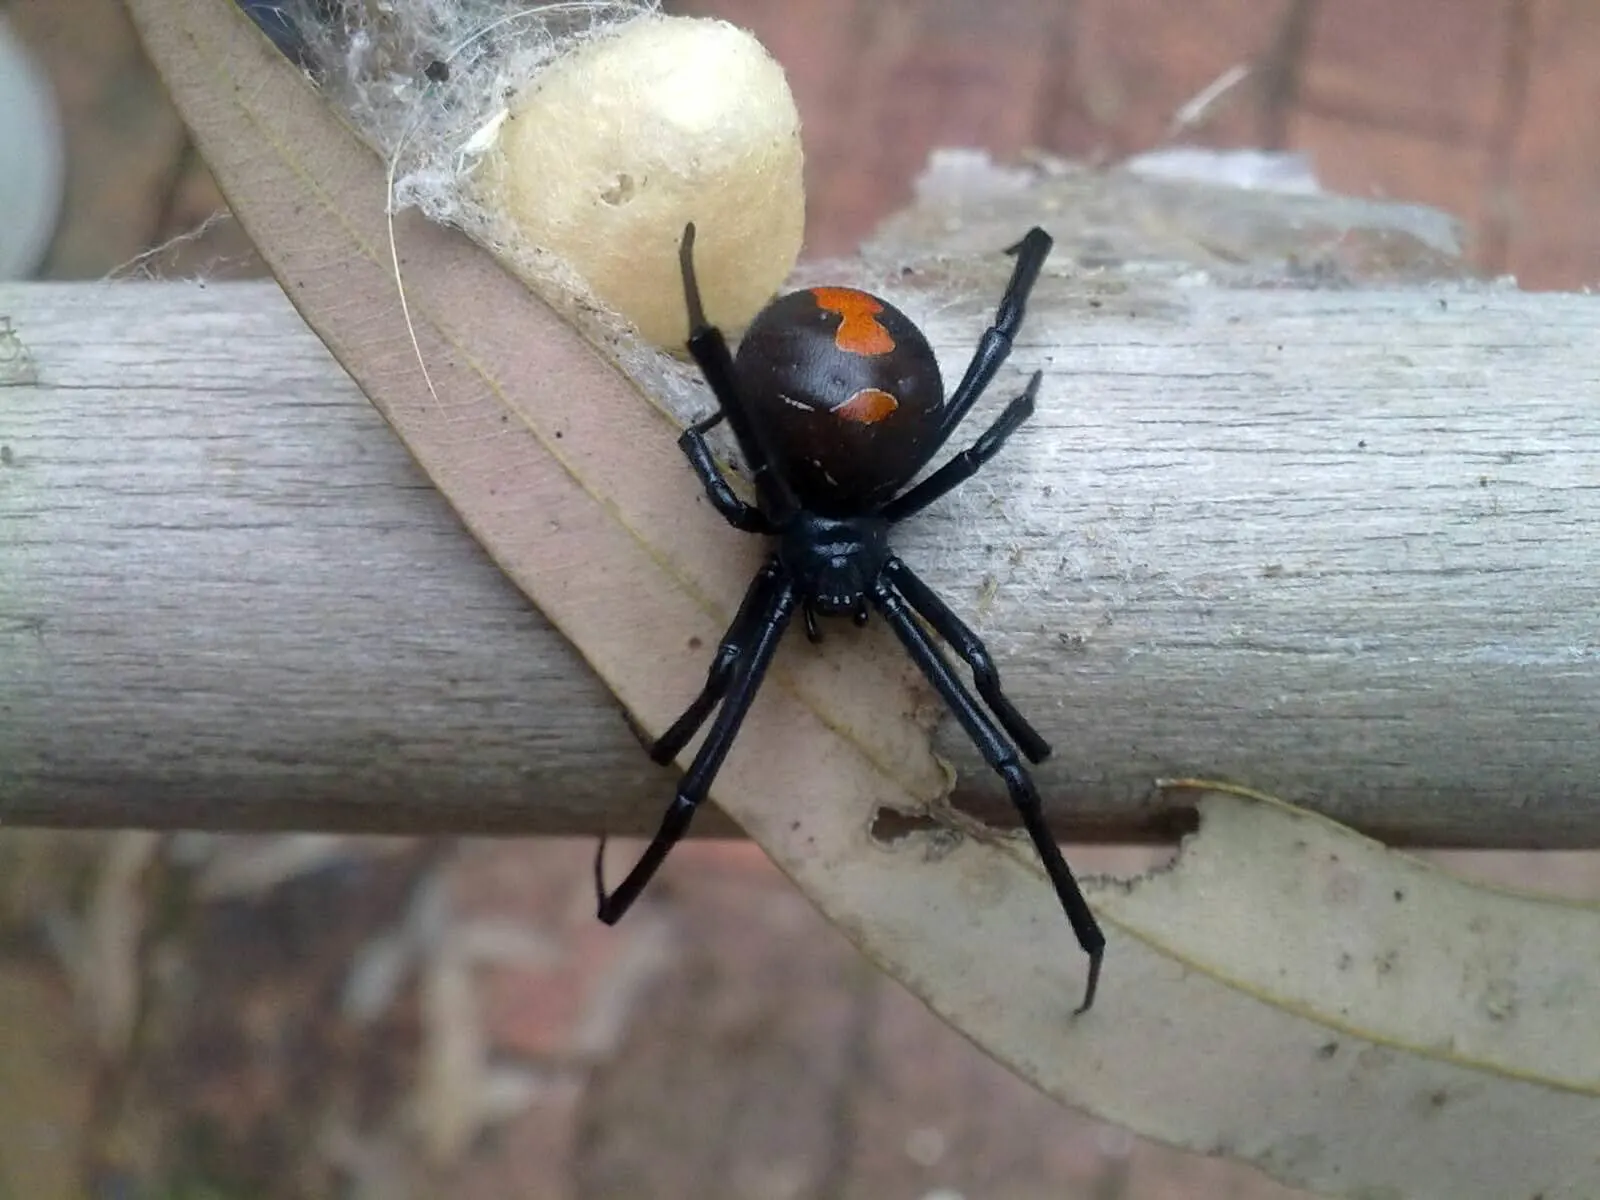 Red back spider one of the most dangerous spiders in Australia